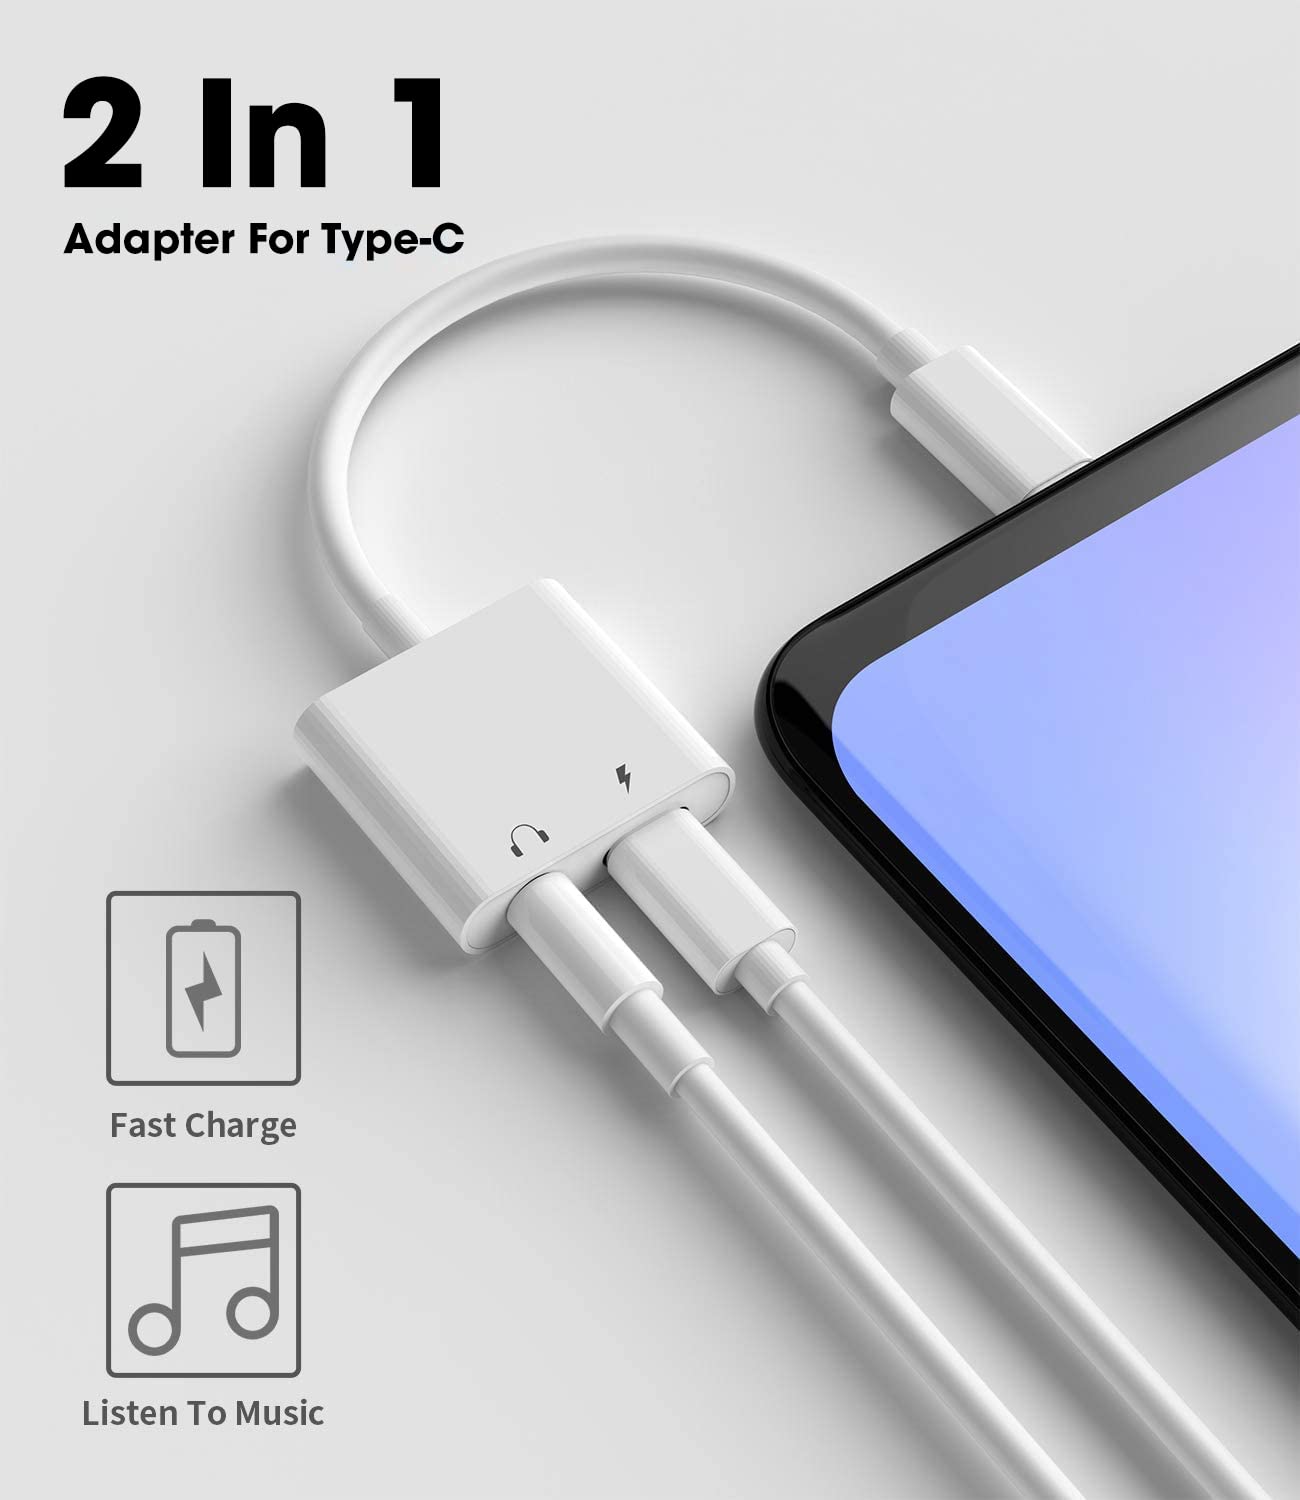 USB C Audio Charge Adapter 3.5mm Jack/PD - USB Audio Adapters, Add-on Cards  & Peripherals, jack to usb c 